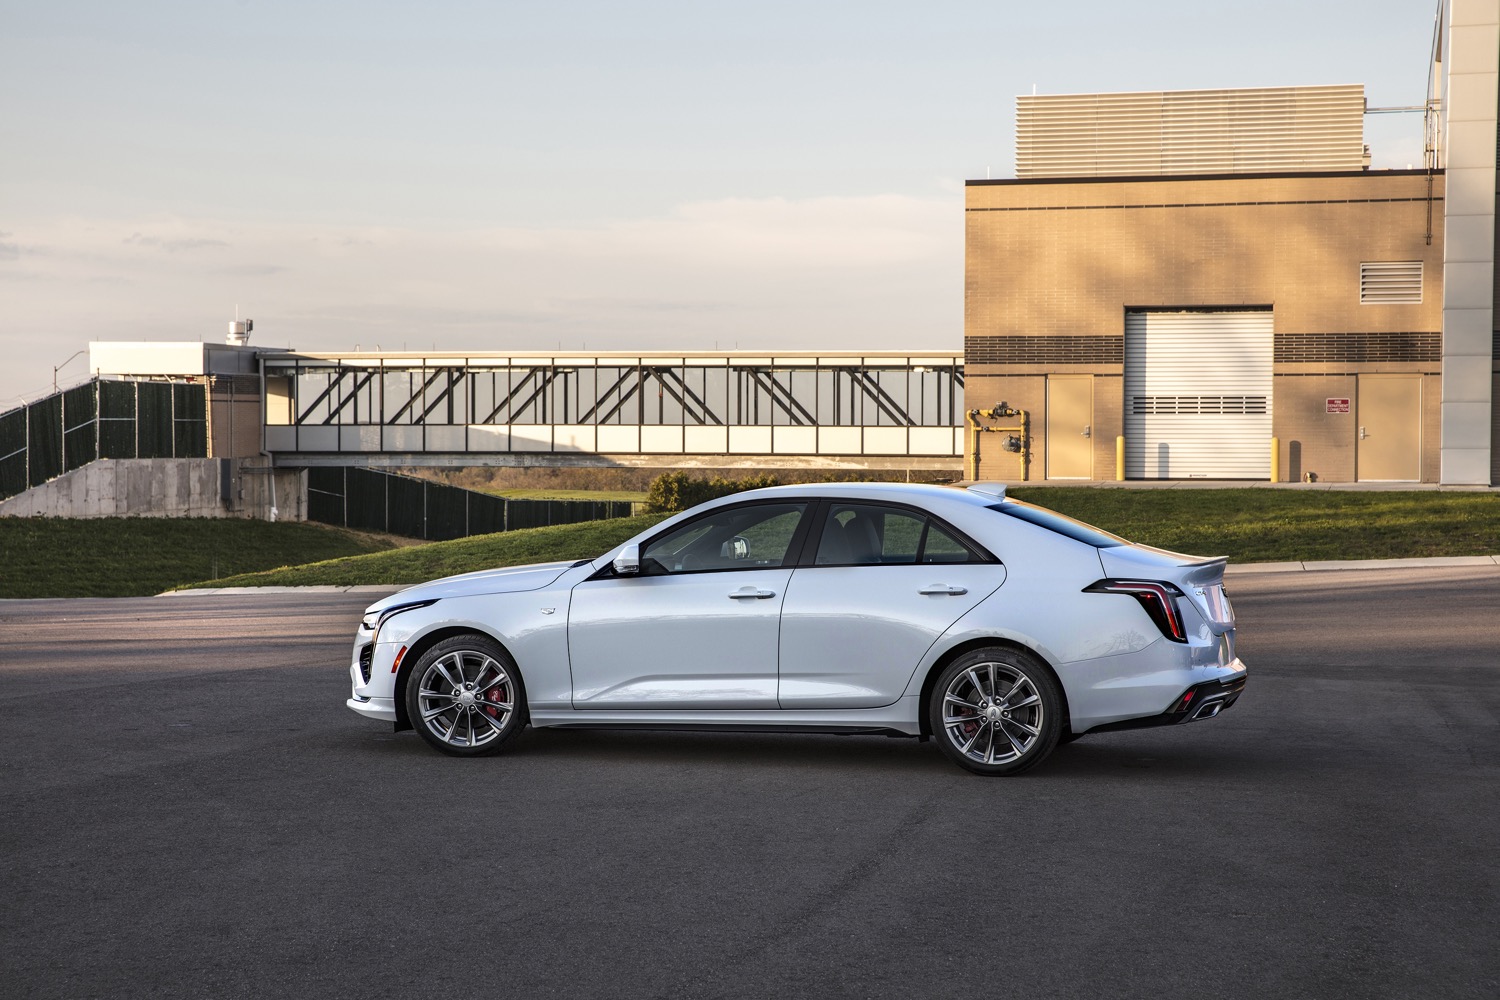 2020 Cadillac Ct4 Info Availability Specs Wiki Gm Authority